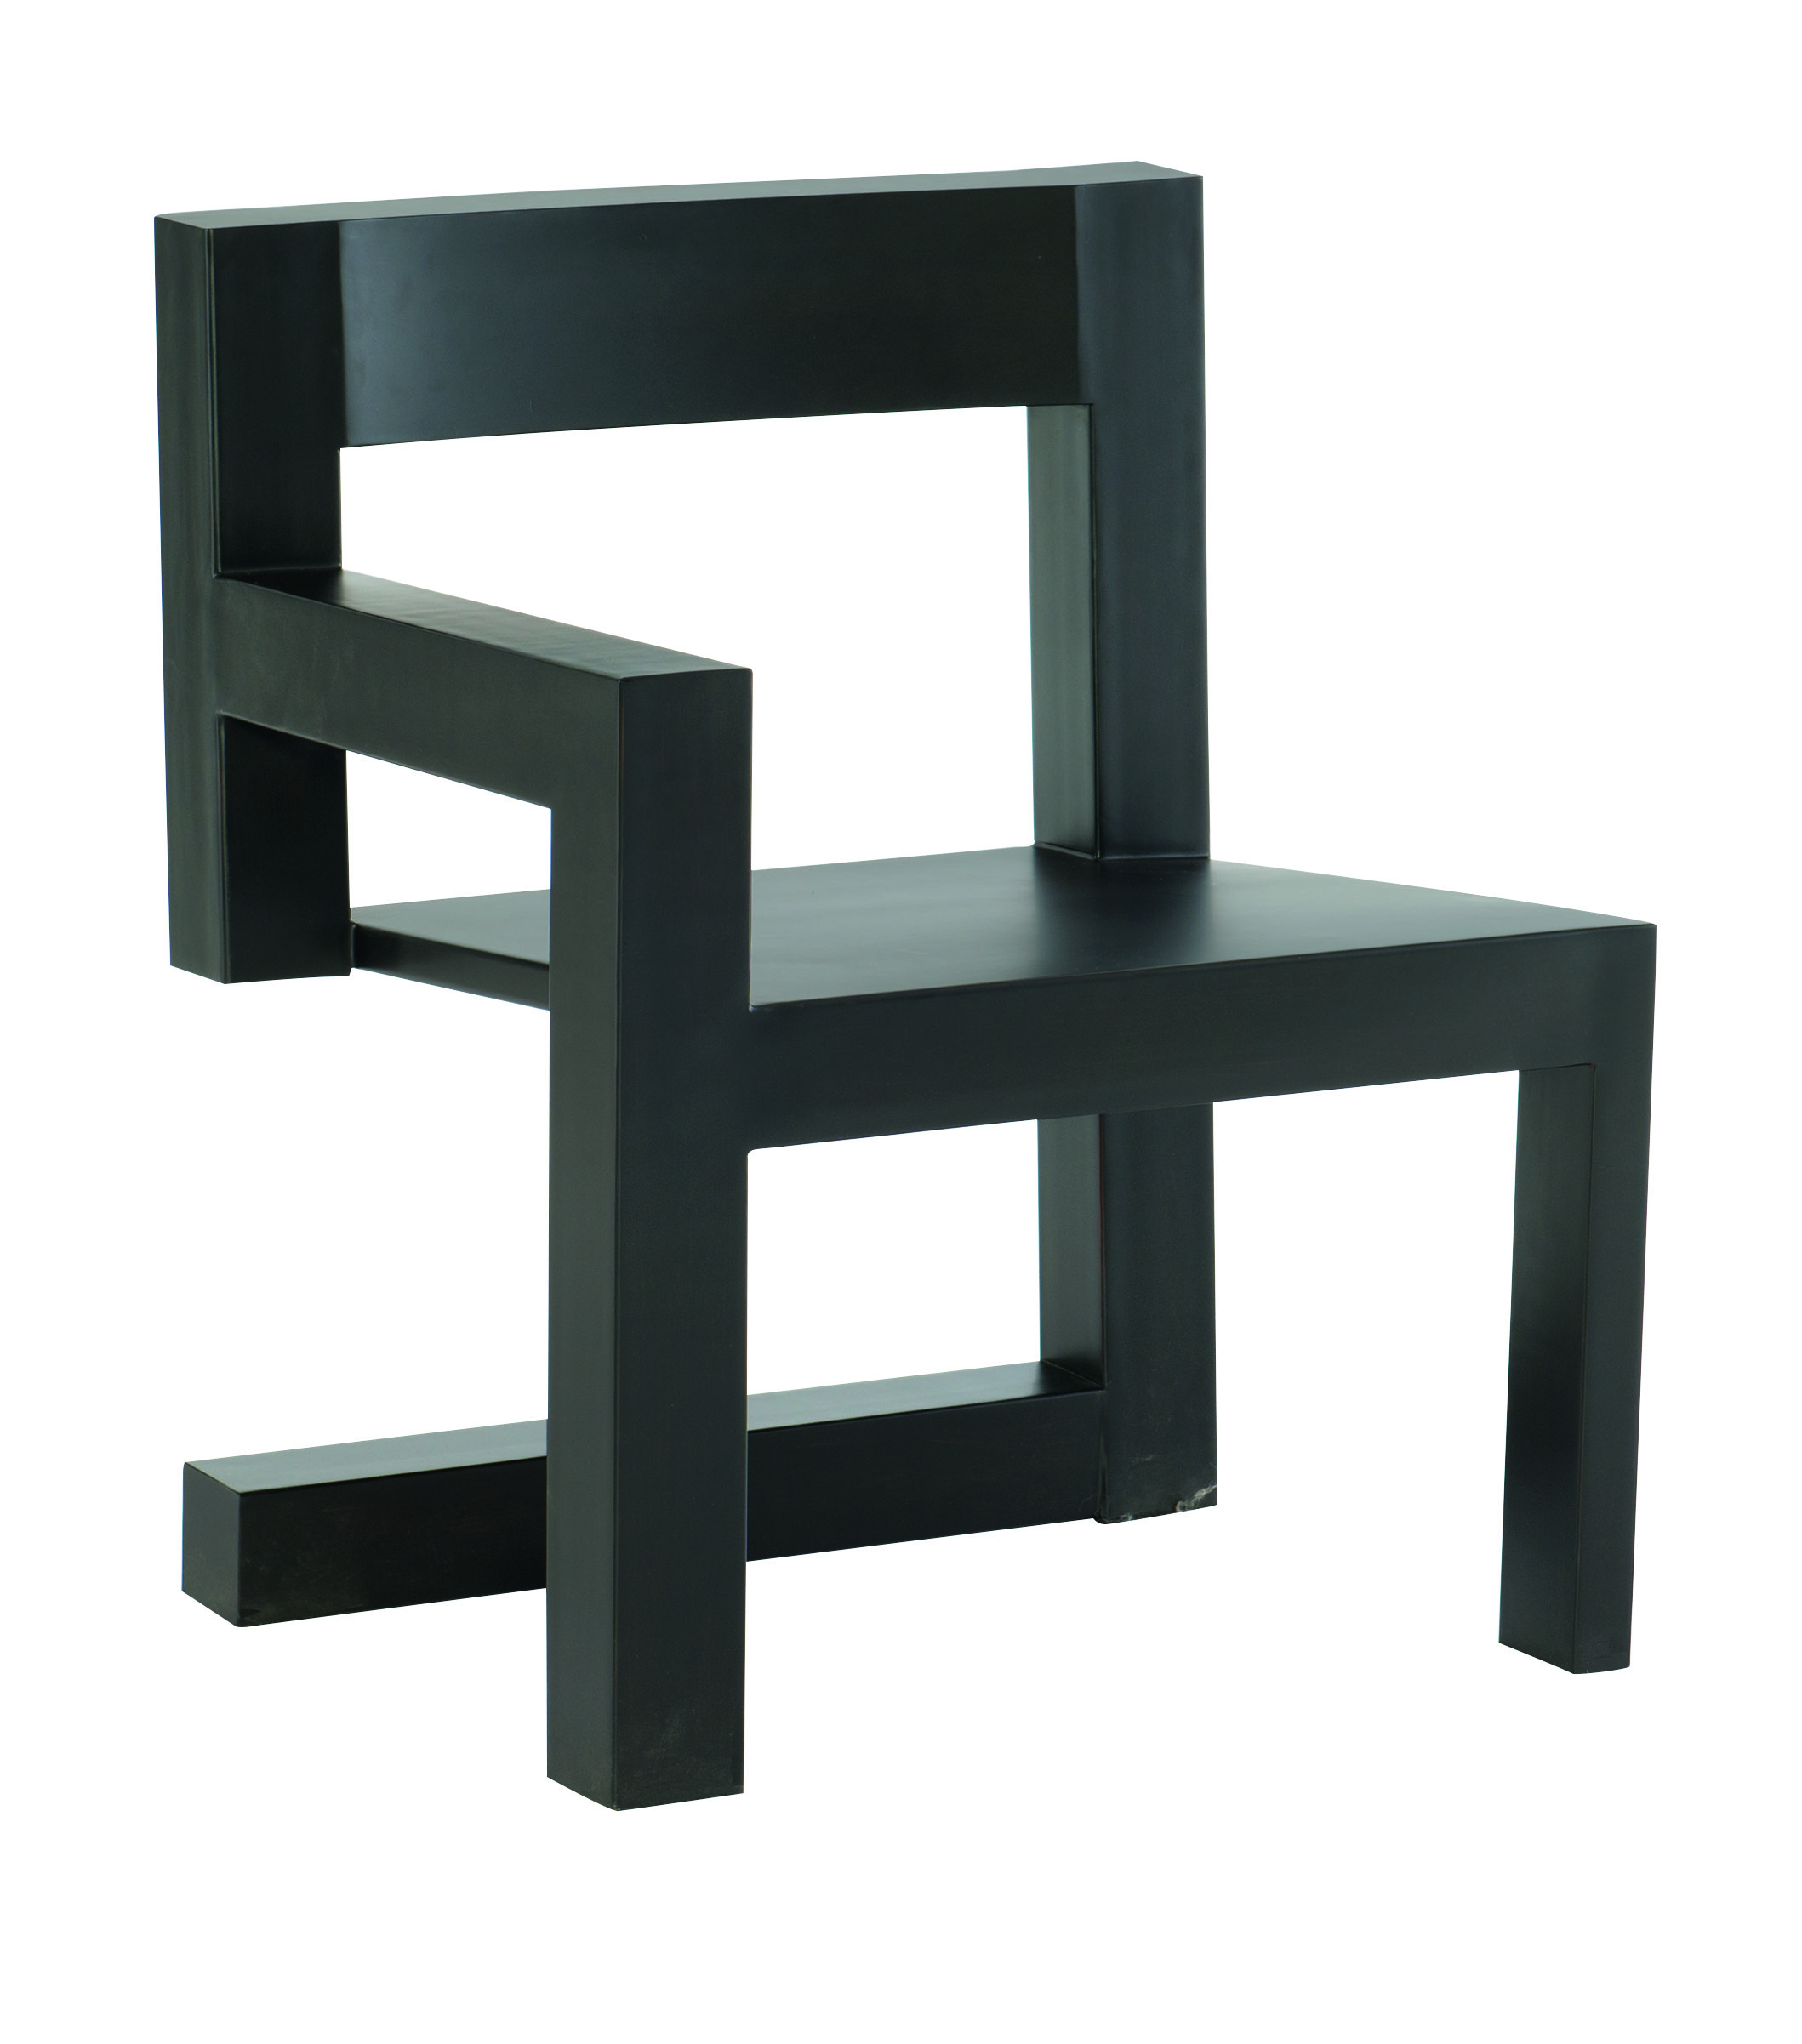 black chair inspired by De Stijl movement